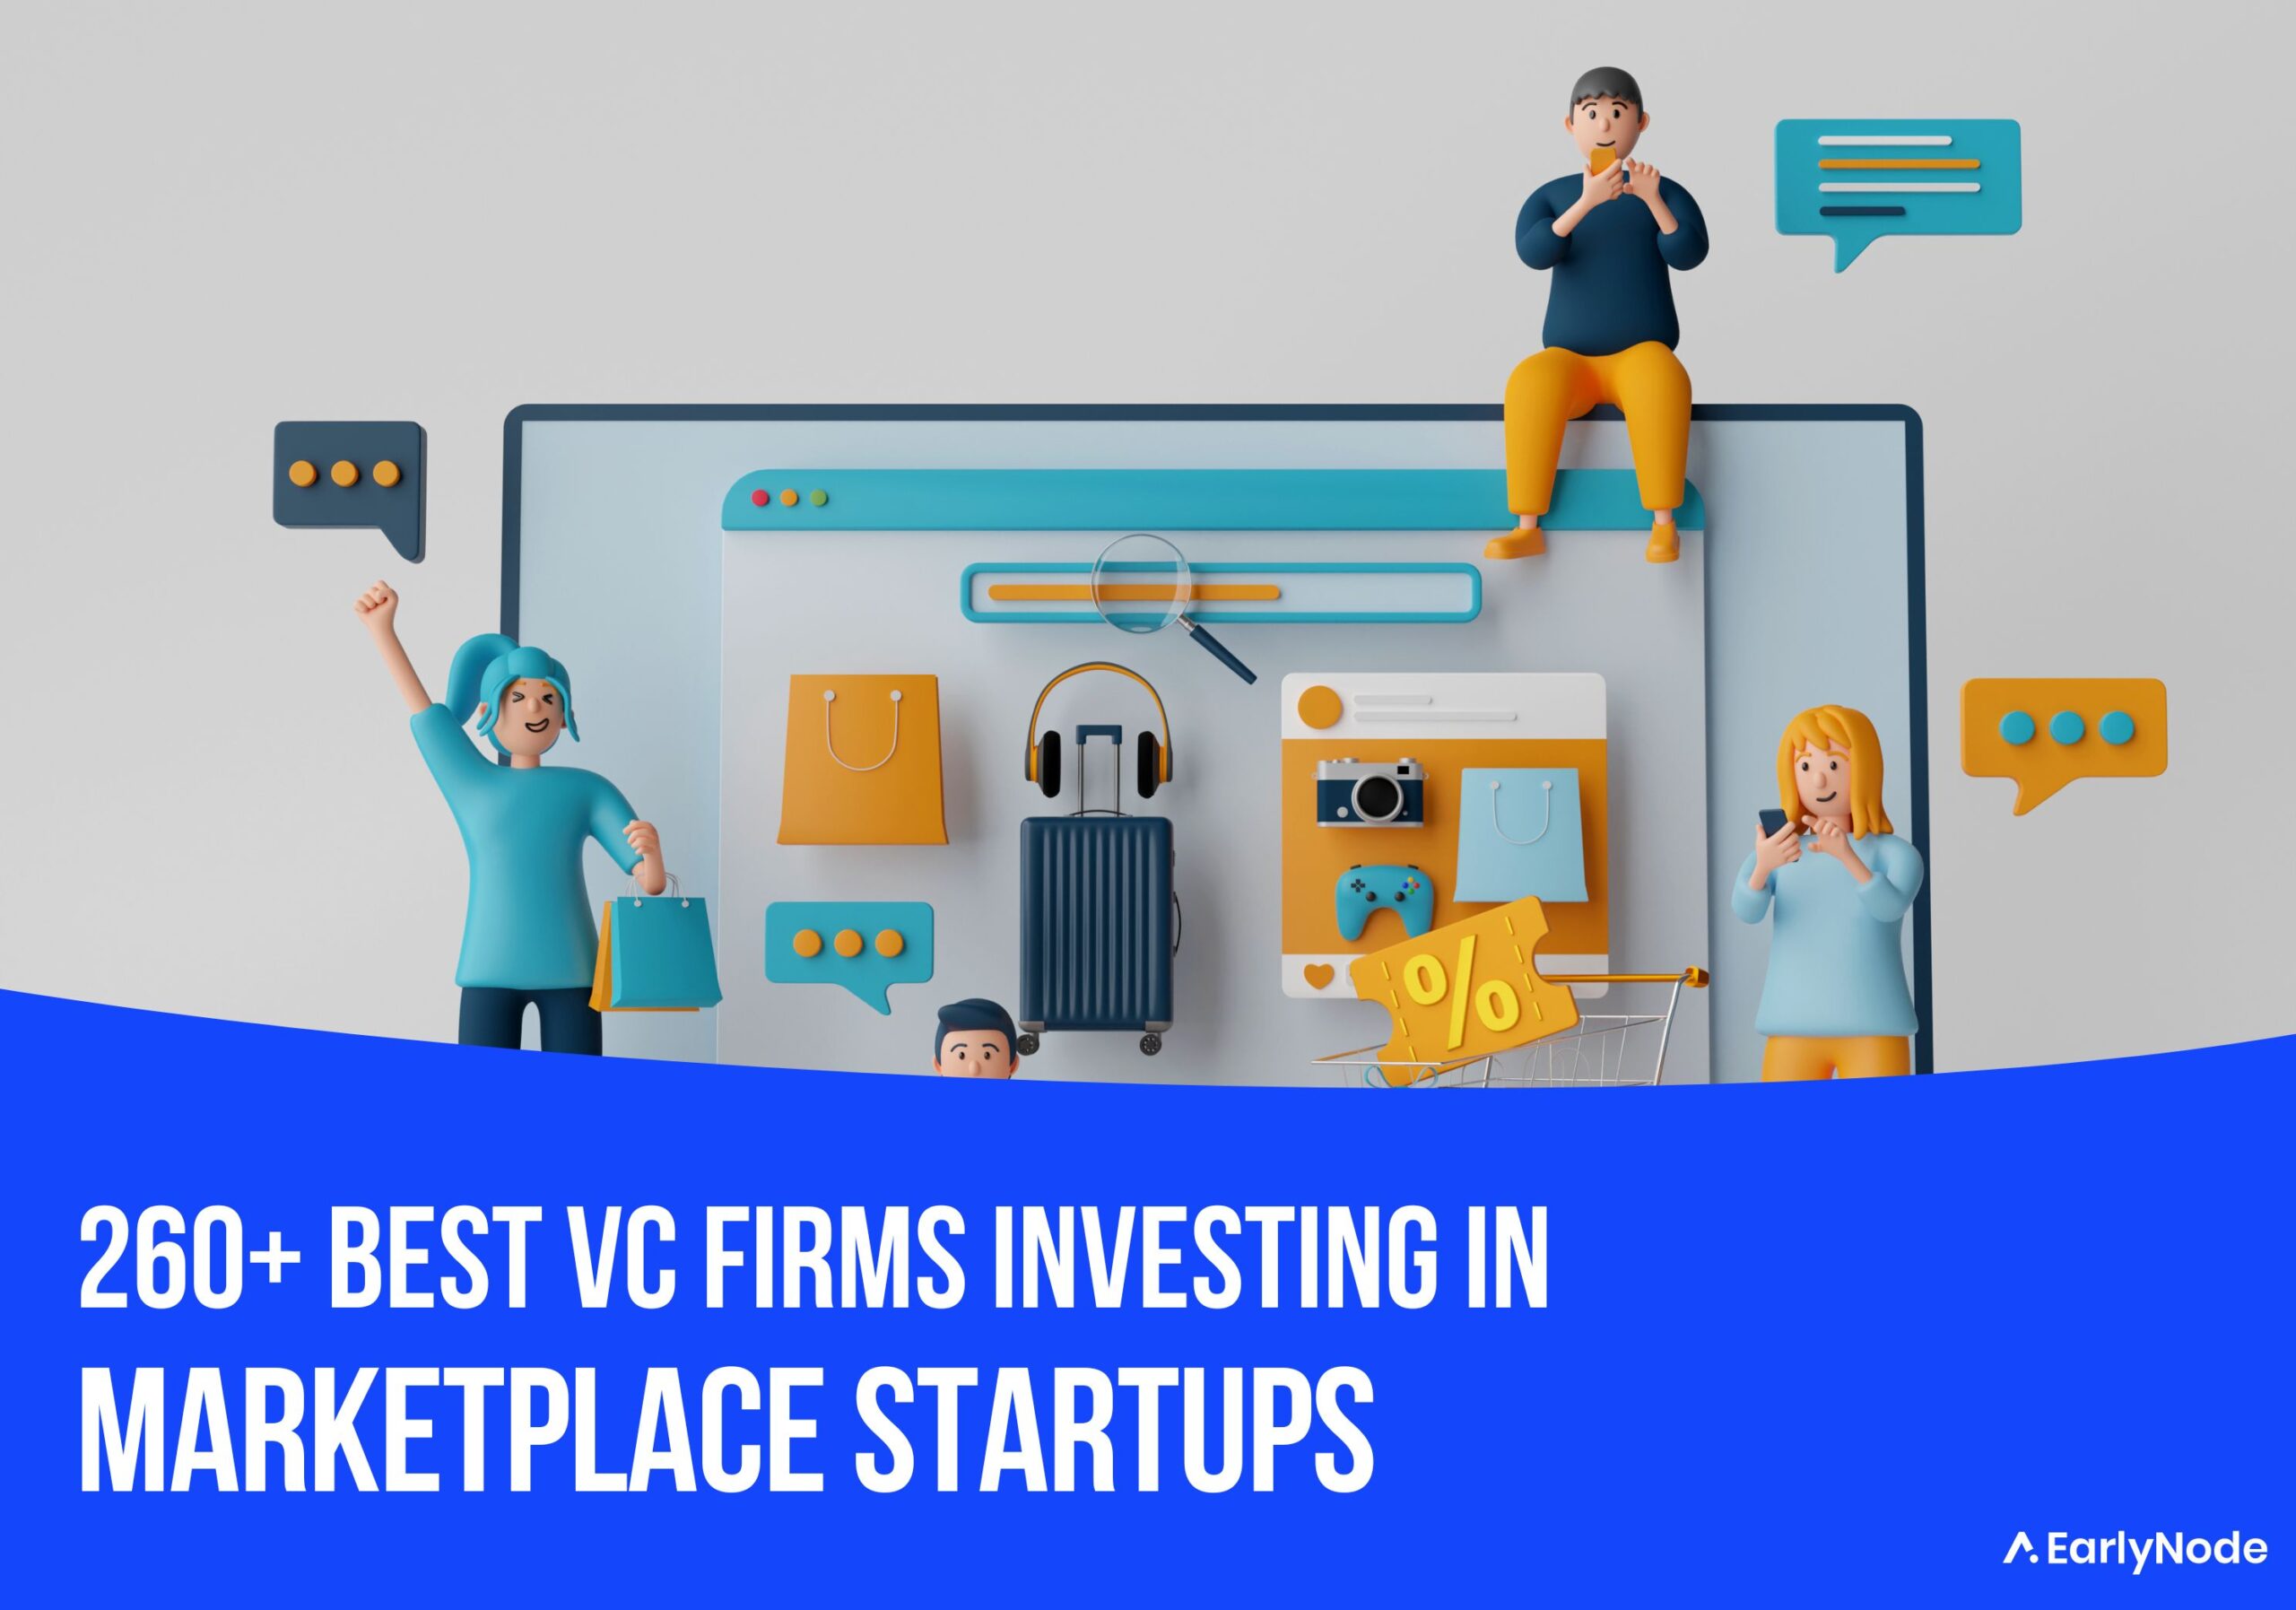 260+ Best Venture Capital (VC) Firms That Invest In Marketplace Startups